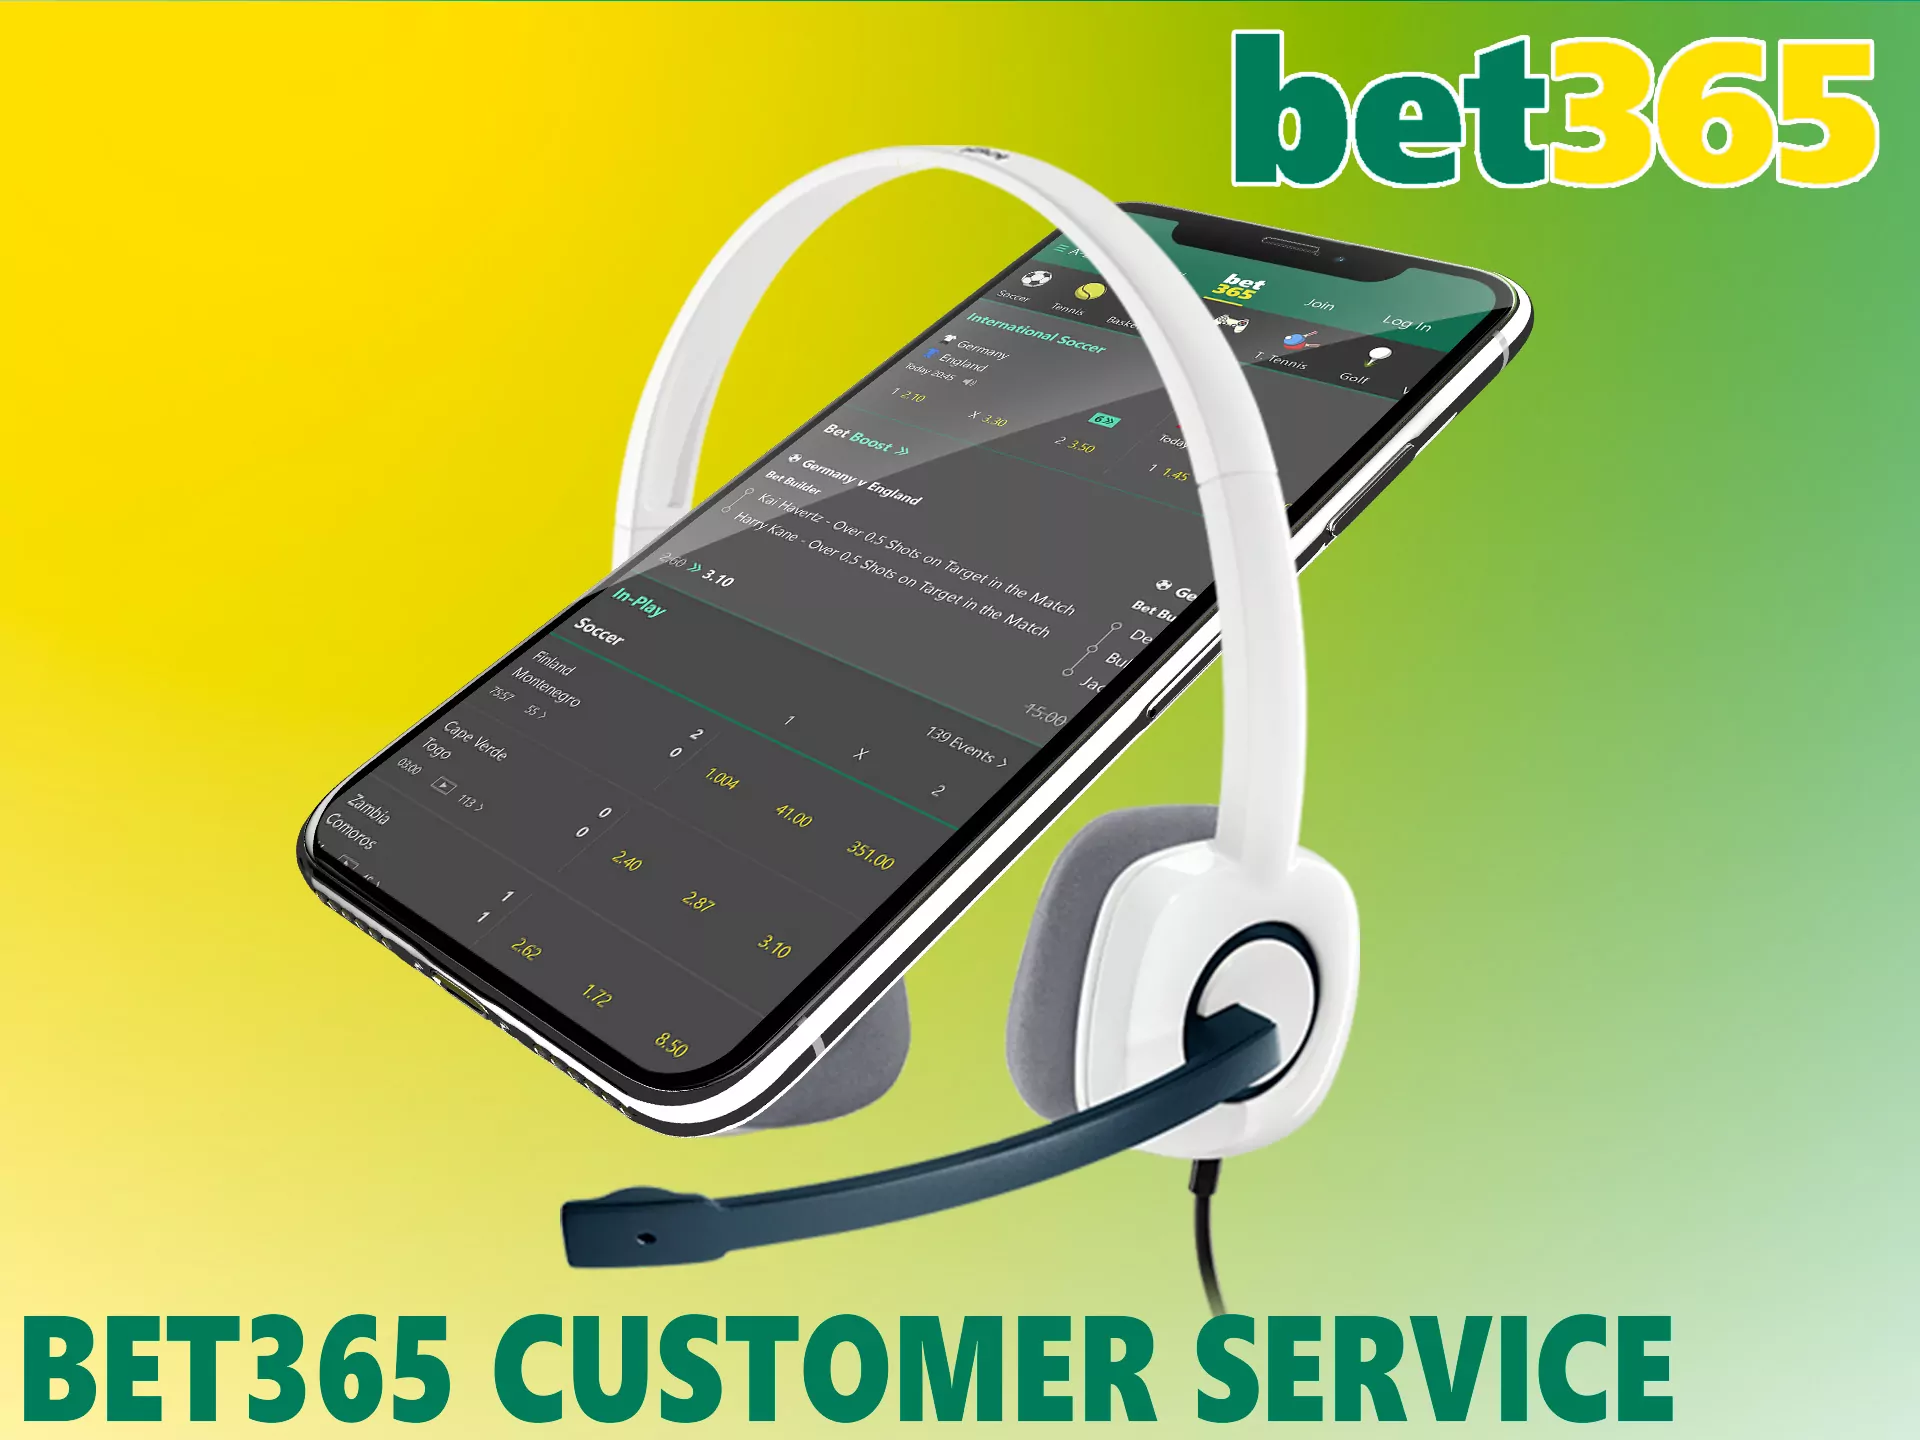 Bet365 have a large number of ways to contact support, they are listed in this article.